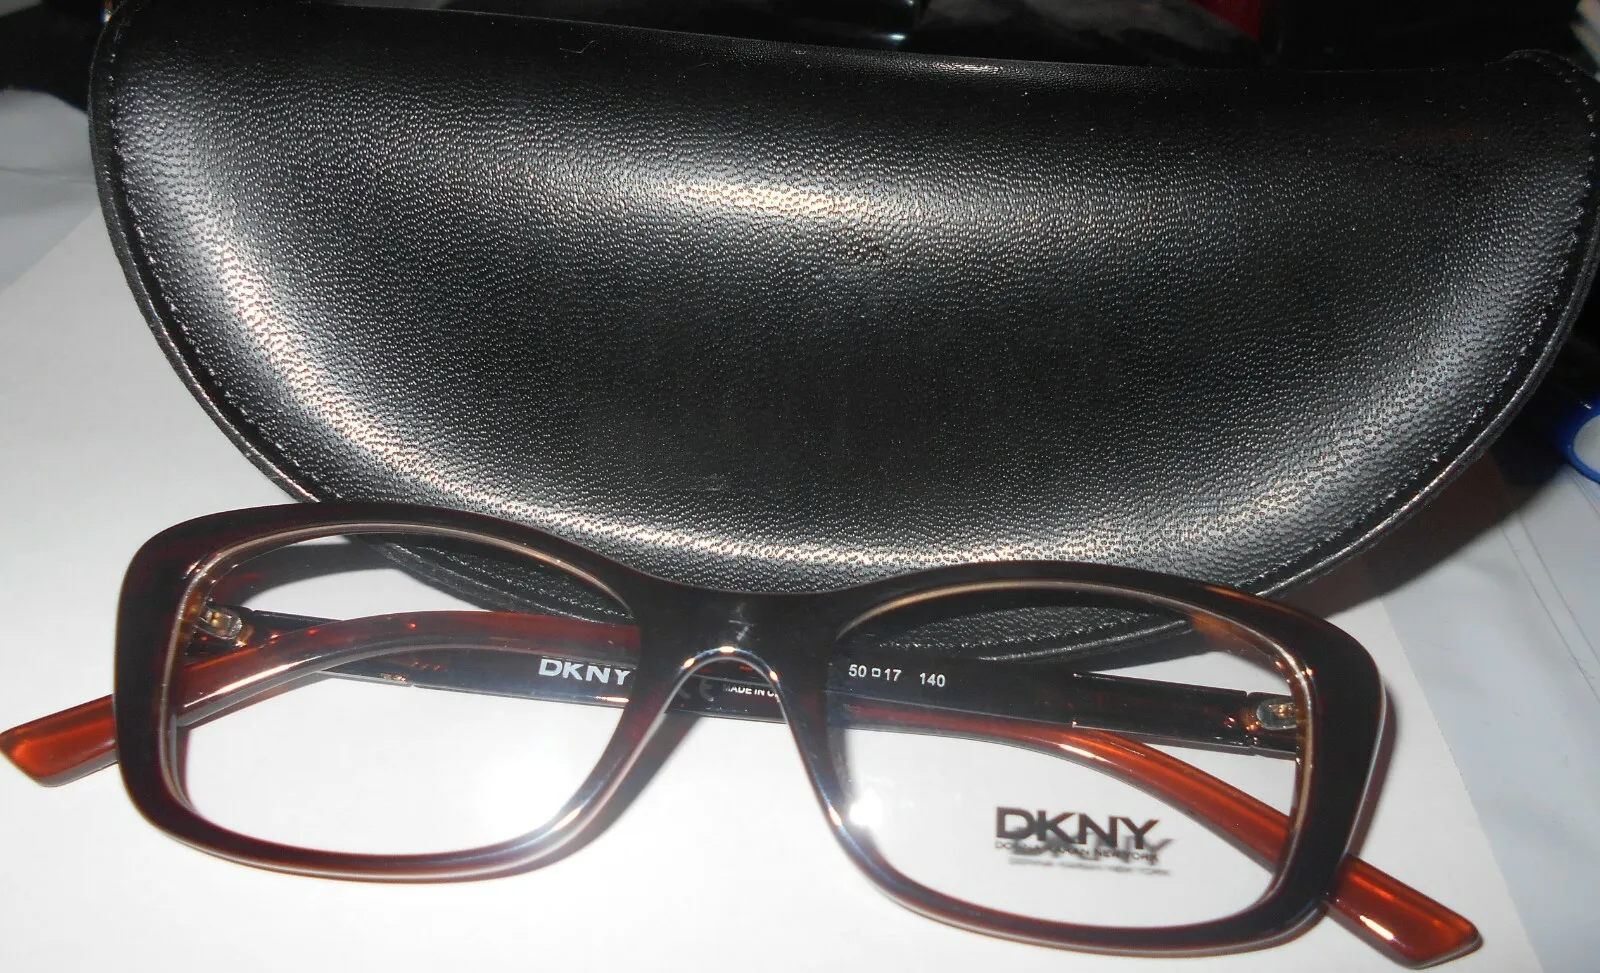 DNKY Glasses/Frames 4661 3657 50 17 140 - brand new with case - $25.00